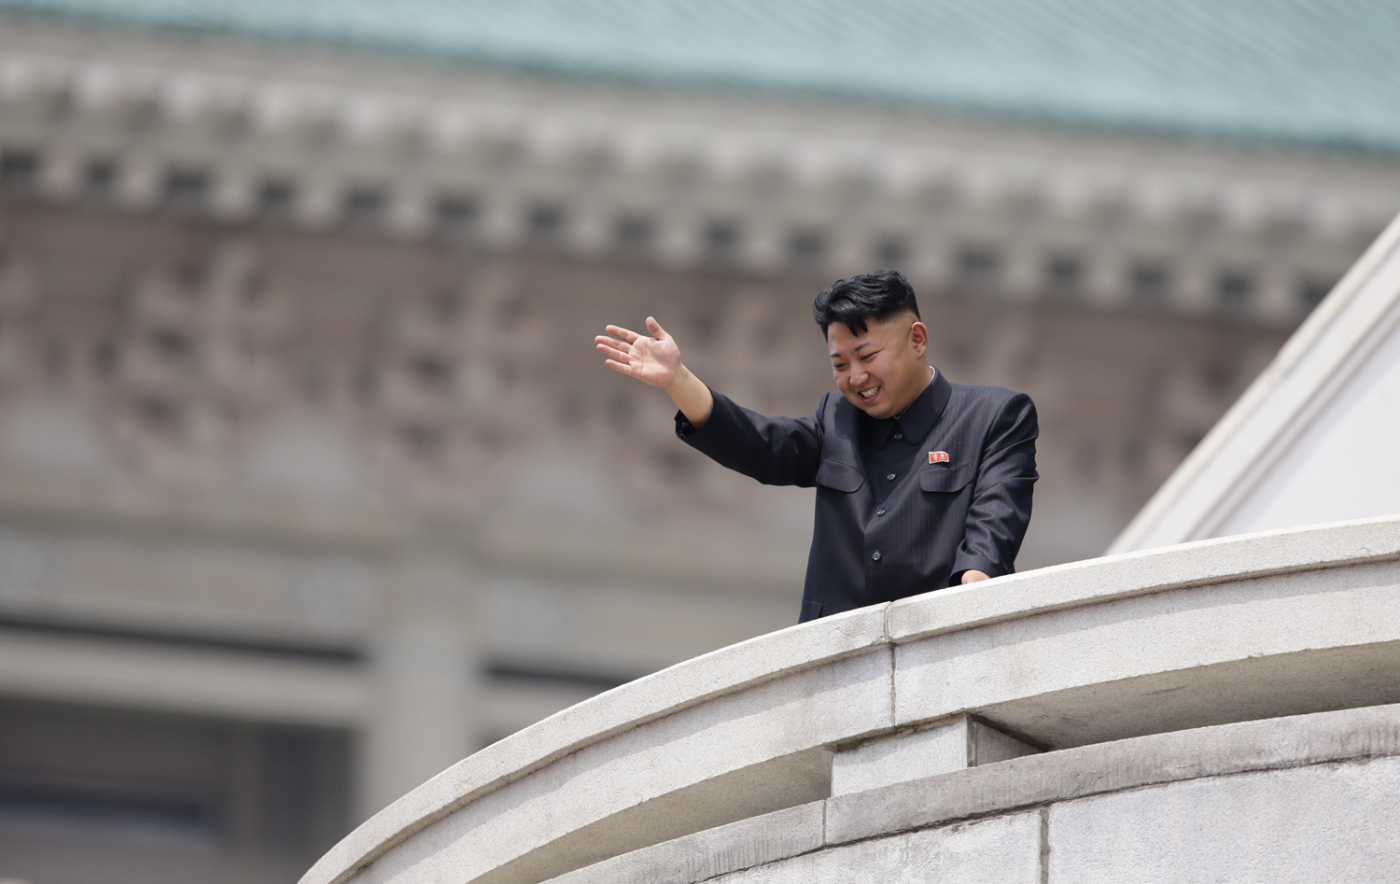 North Korean leader Kim Jong-un waves to the people during a parade to commemorate the 60th anniversary of the signing of a truce in the 1950-1953 Korean War, at Kim Il-sung Square in Pyongyang July 27, 2013. (Jason Lee&mdash;Reuters)